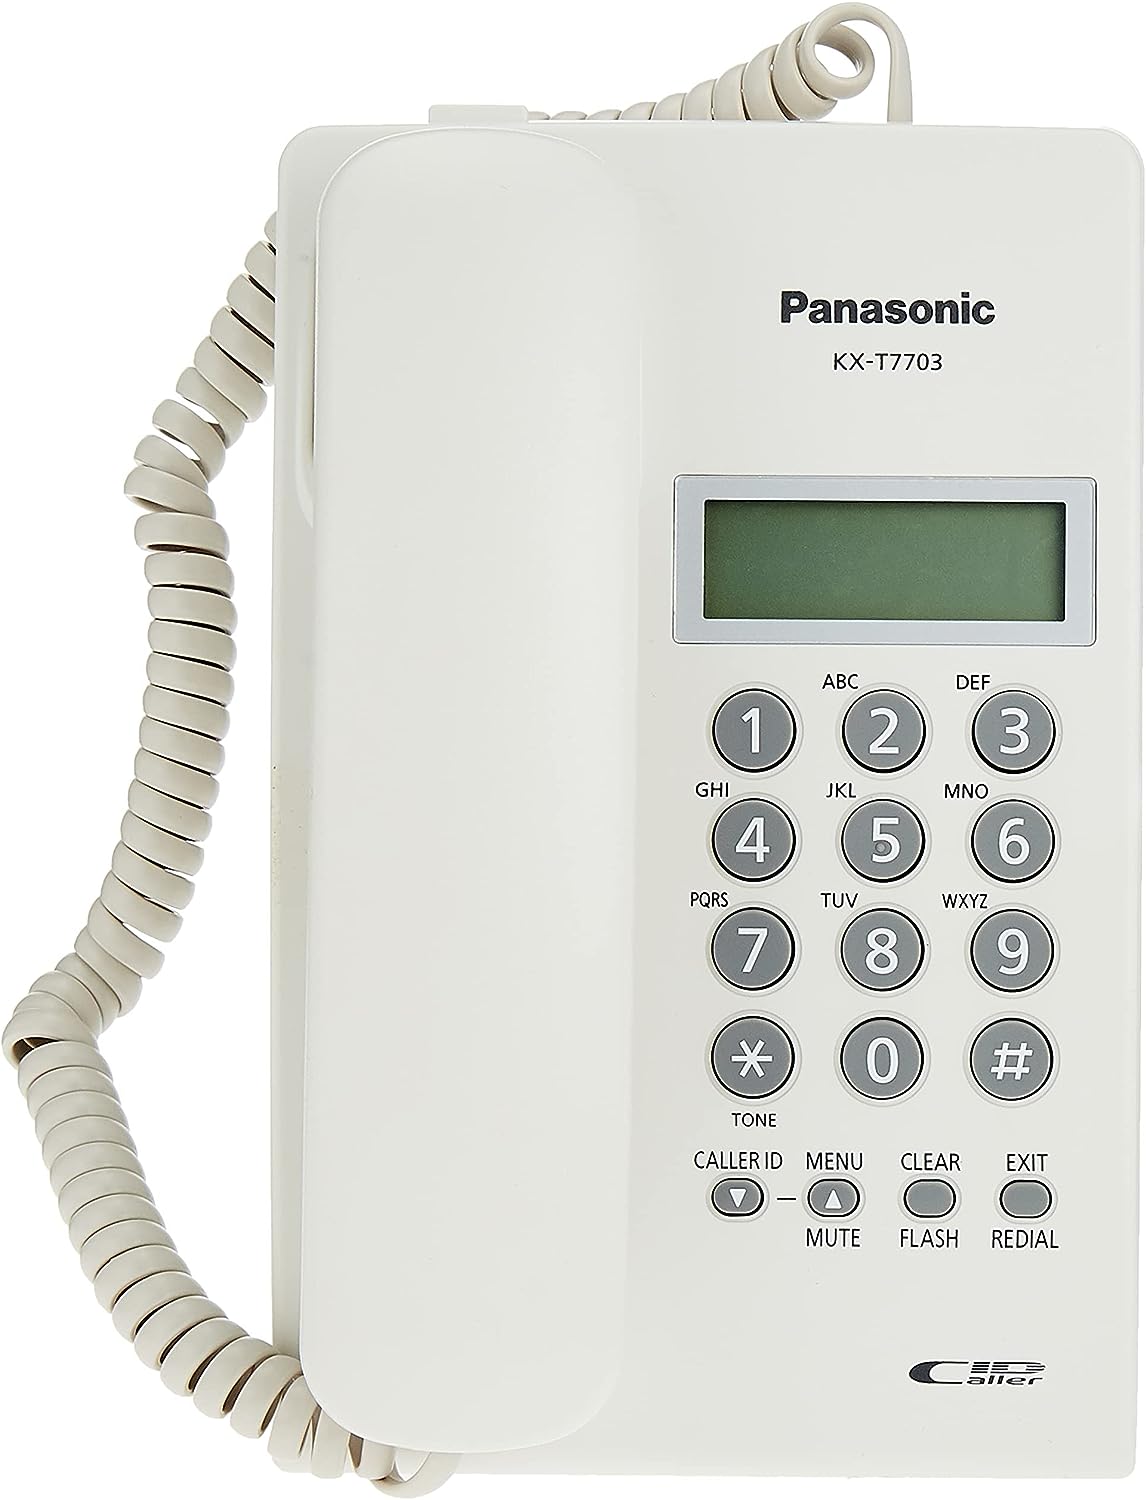 Phone with caller ID display from Panasonic, made in Malaysia, white color KX-T7703X